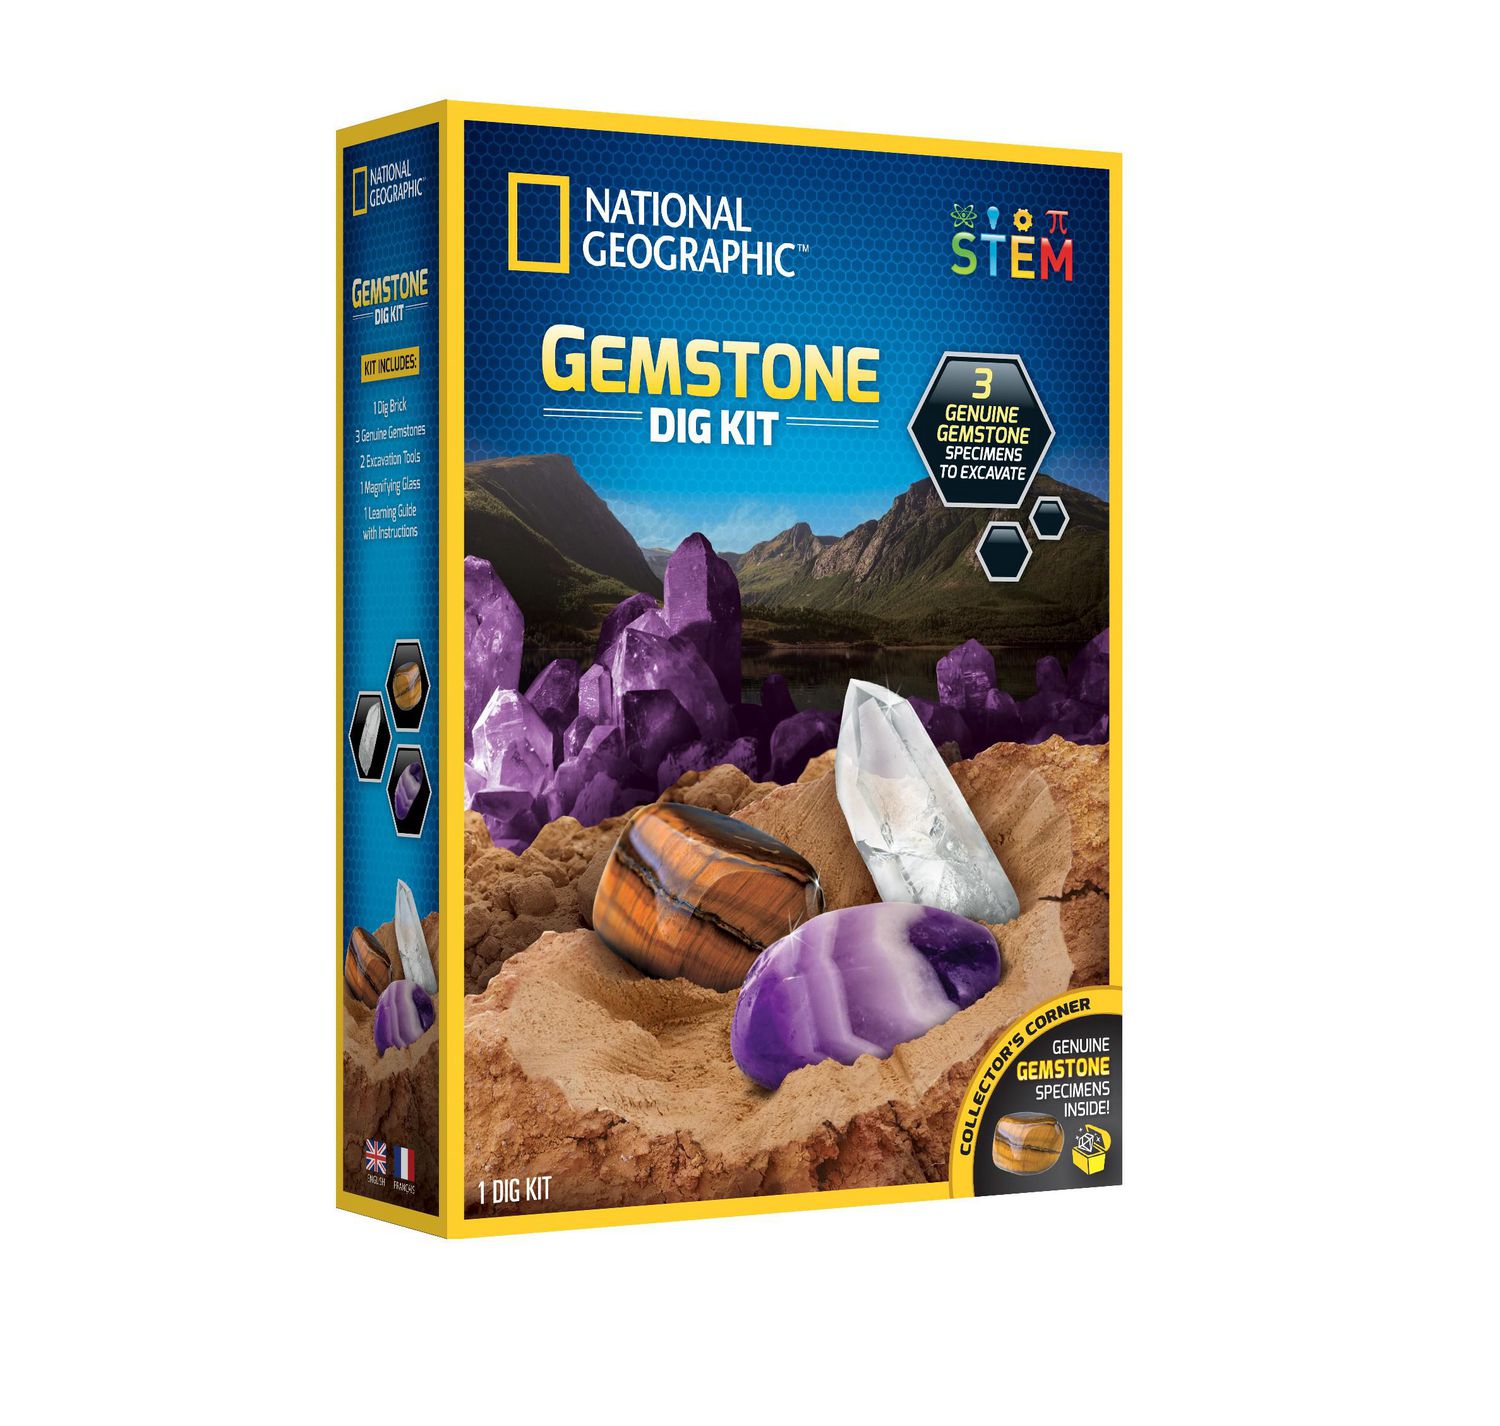 National Geographic Ultimate Gemstone Dig Kit Review – What's Good